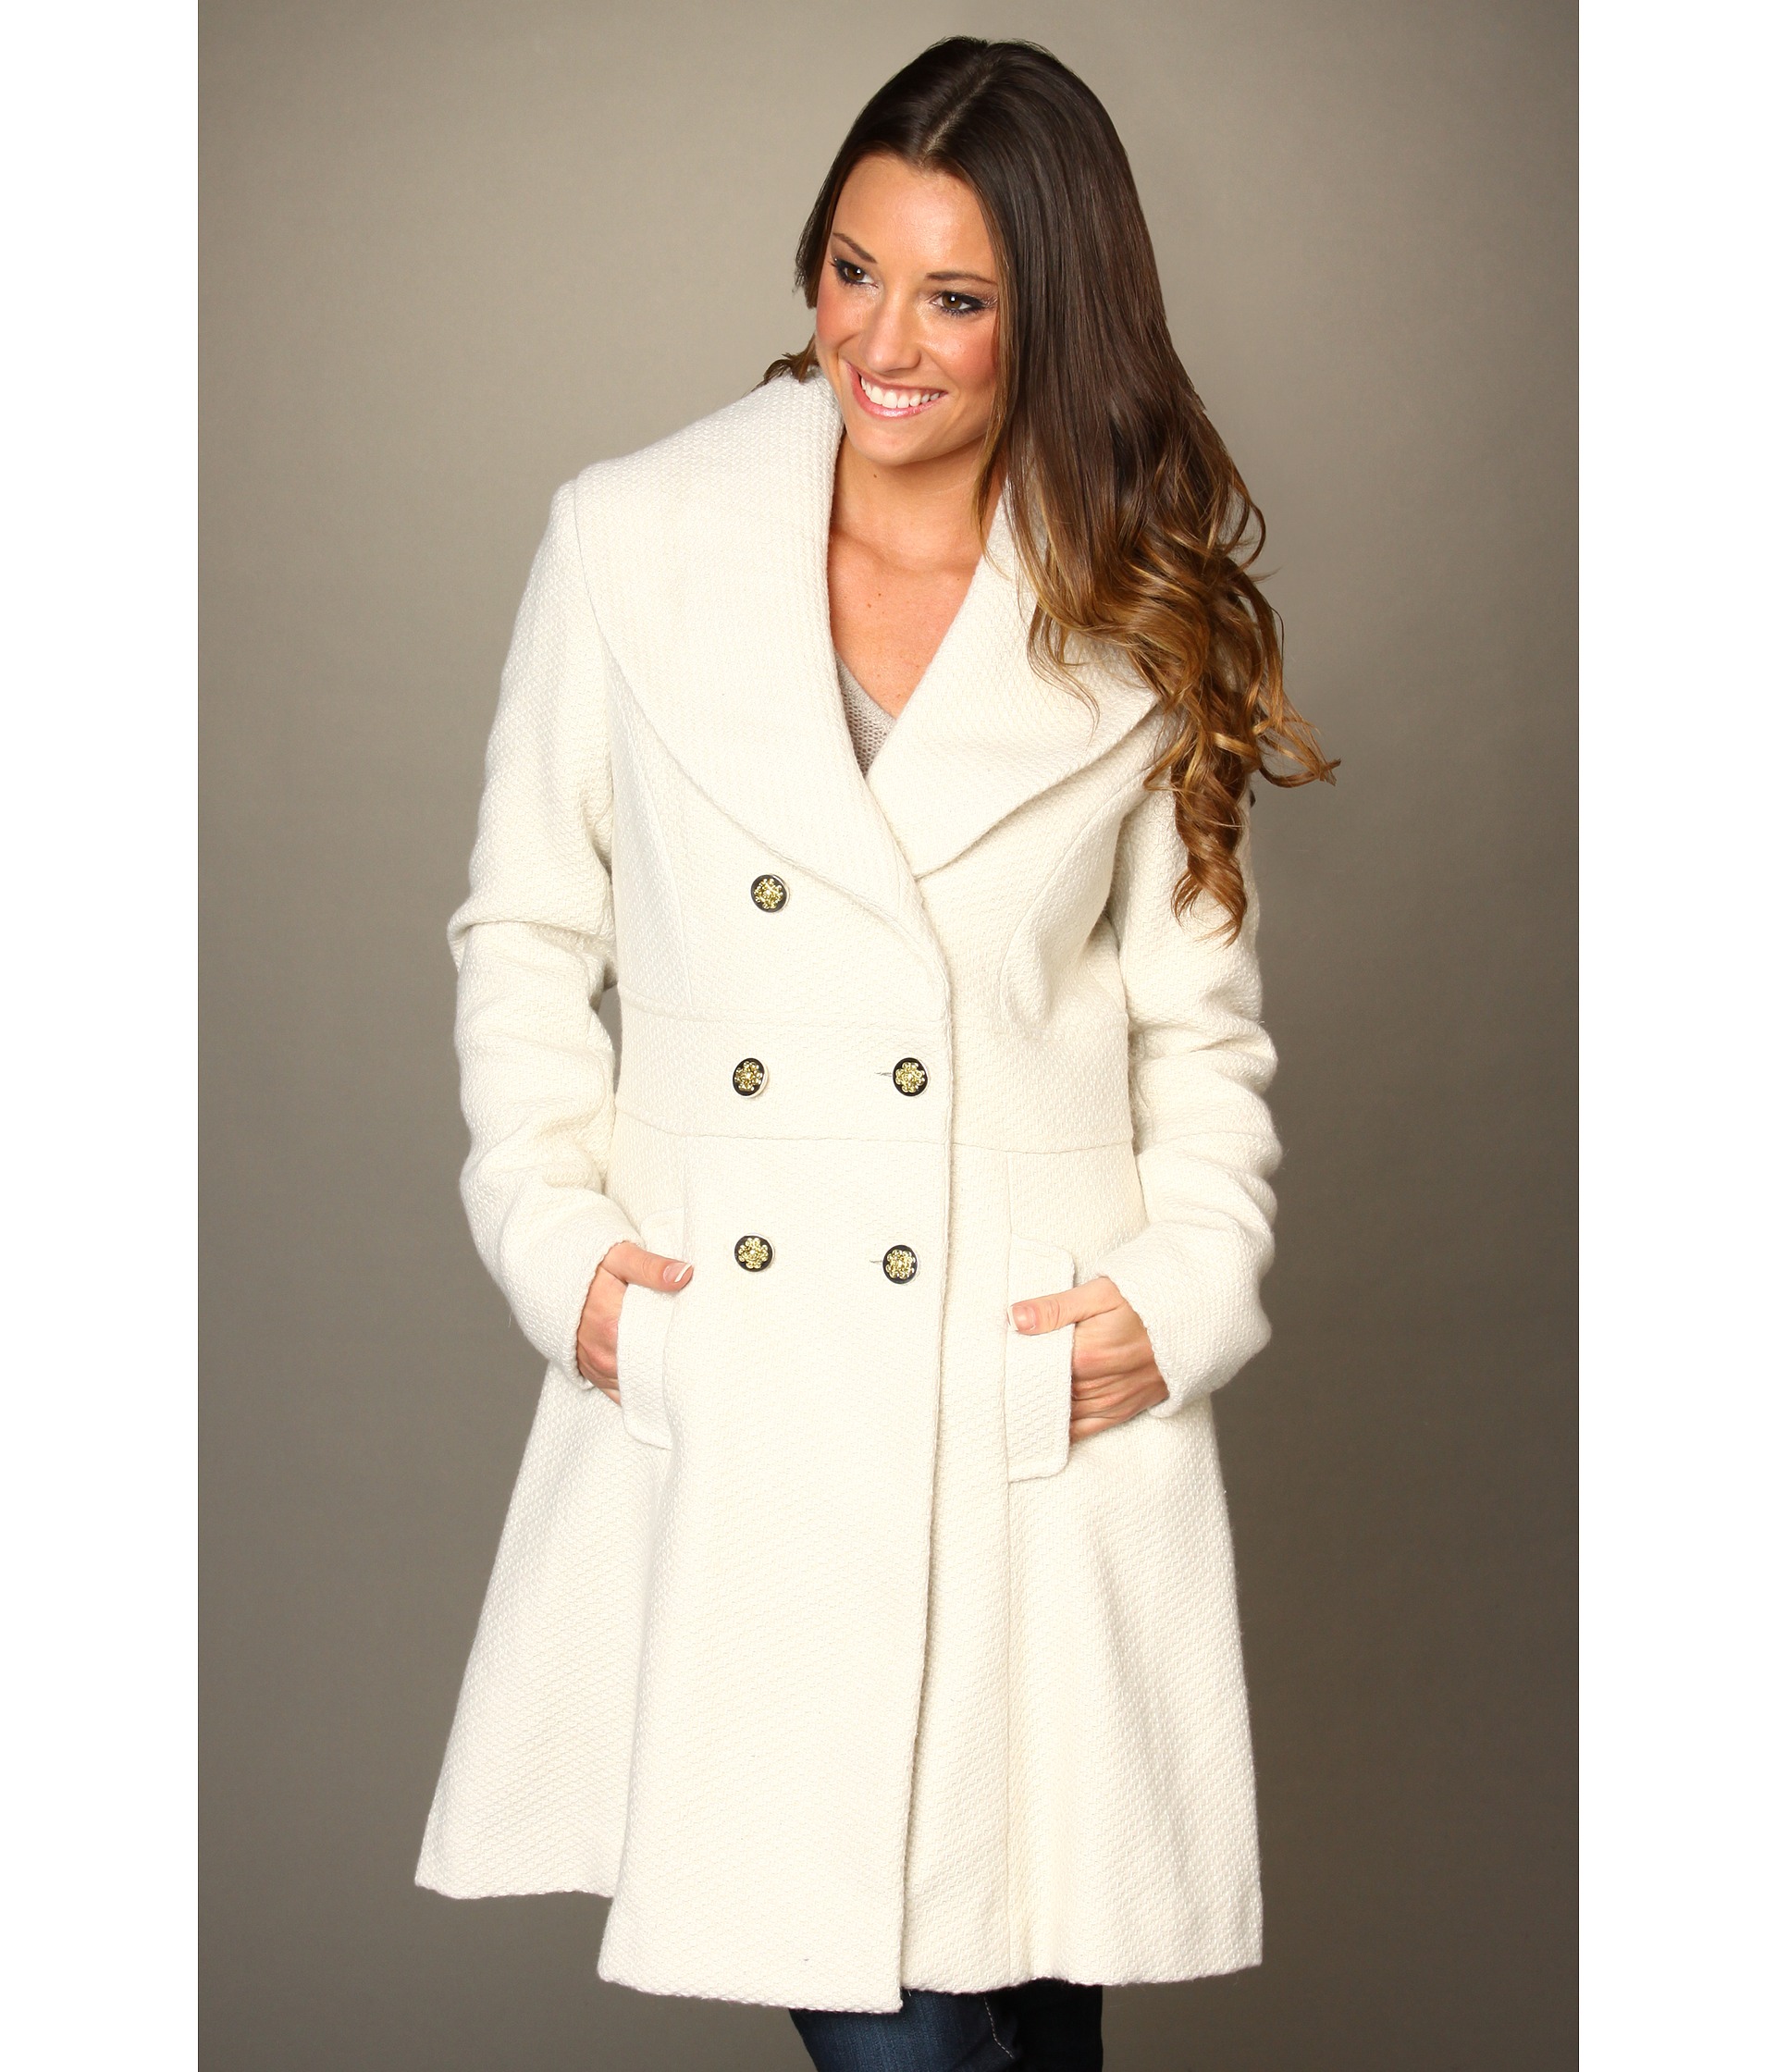   Double Breasted Textured Coat $110.99 $158.00 